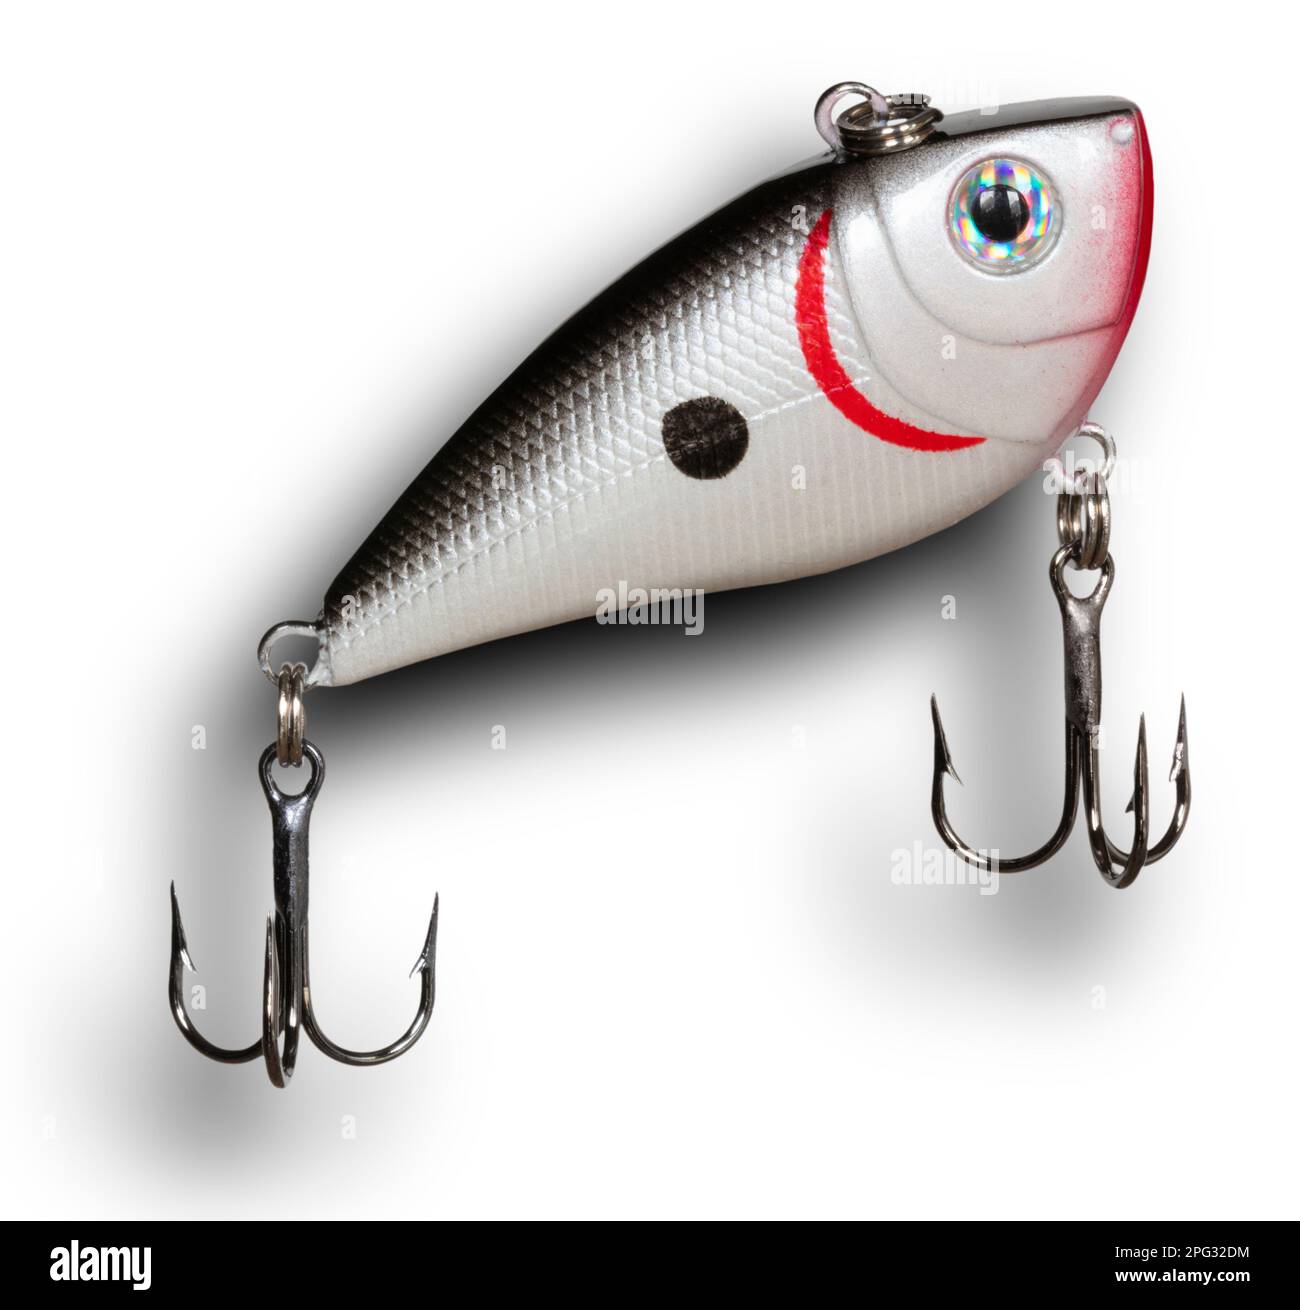 Shadow behind a gray, red and white artificial fishing lure with